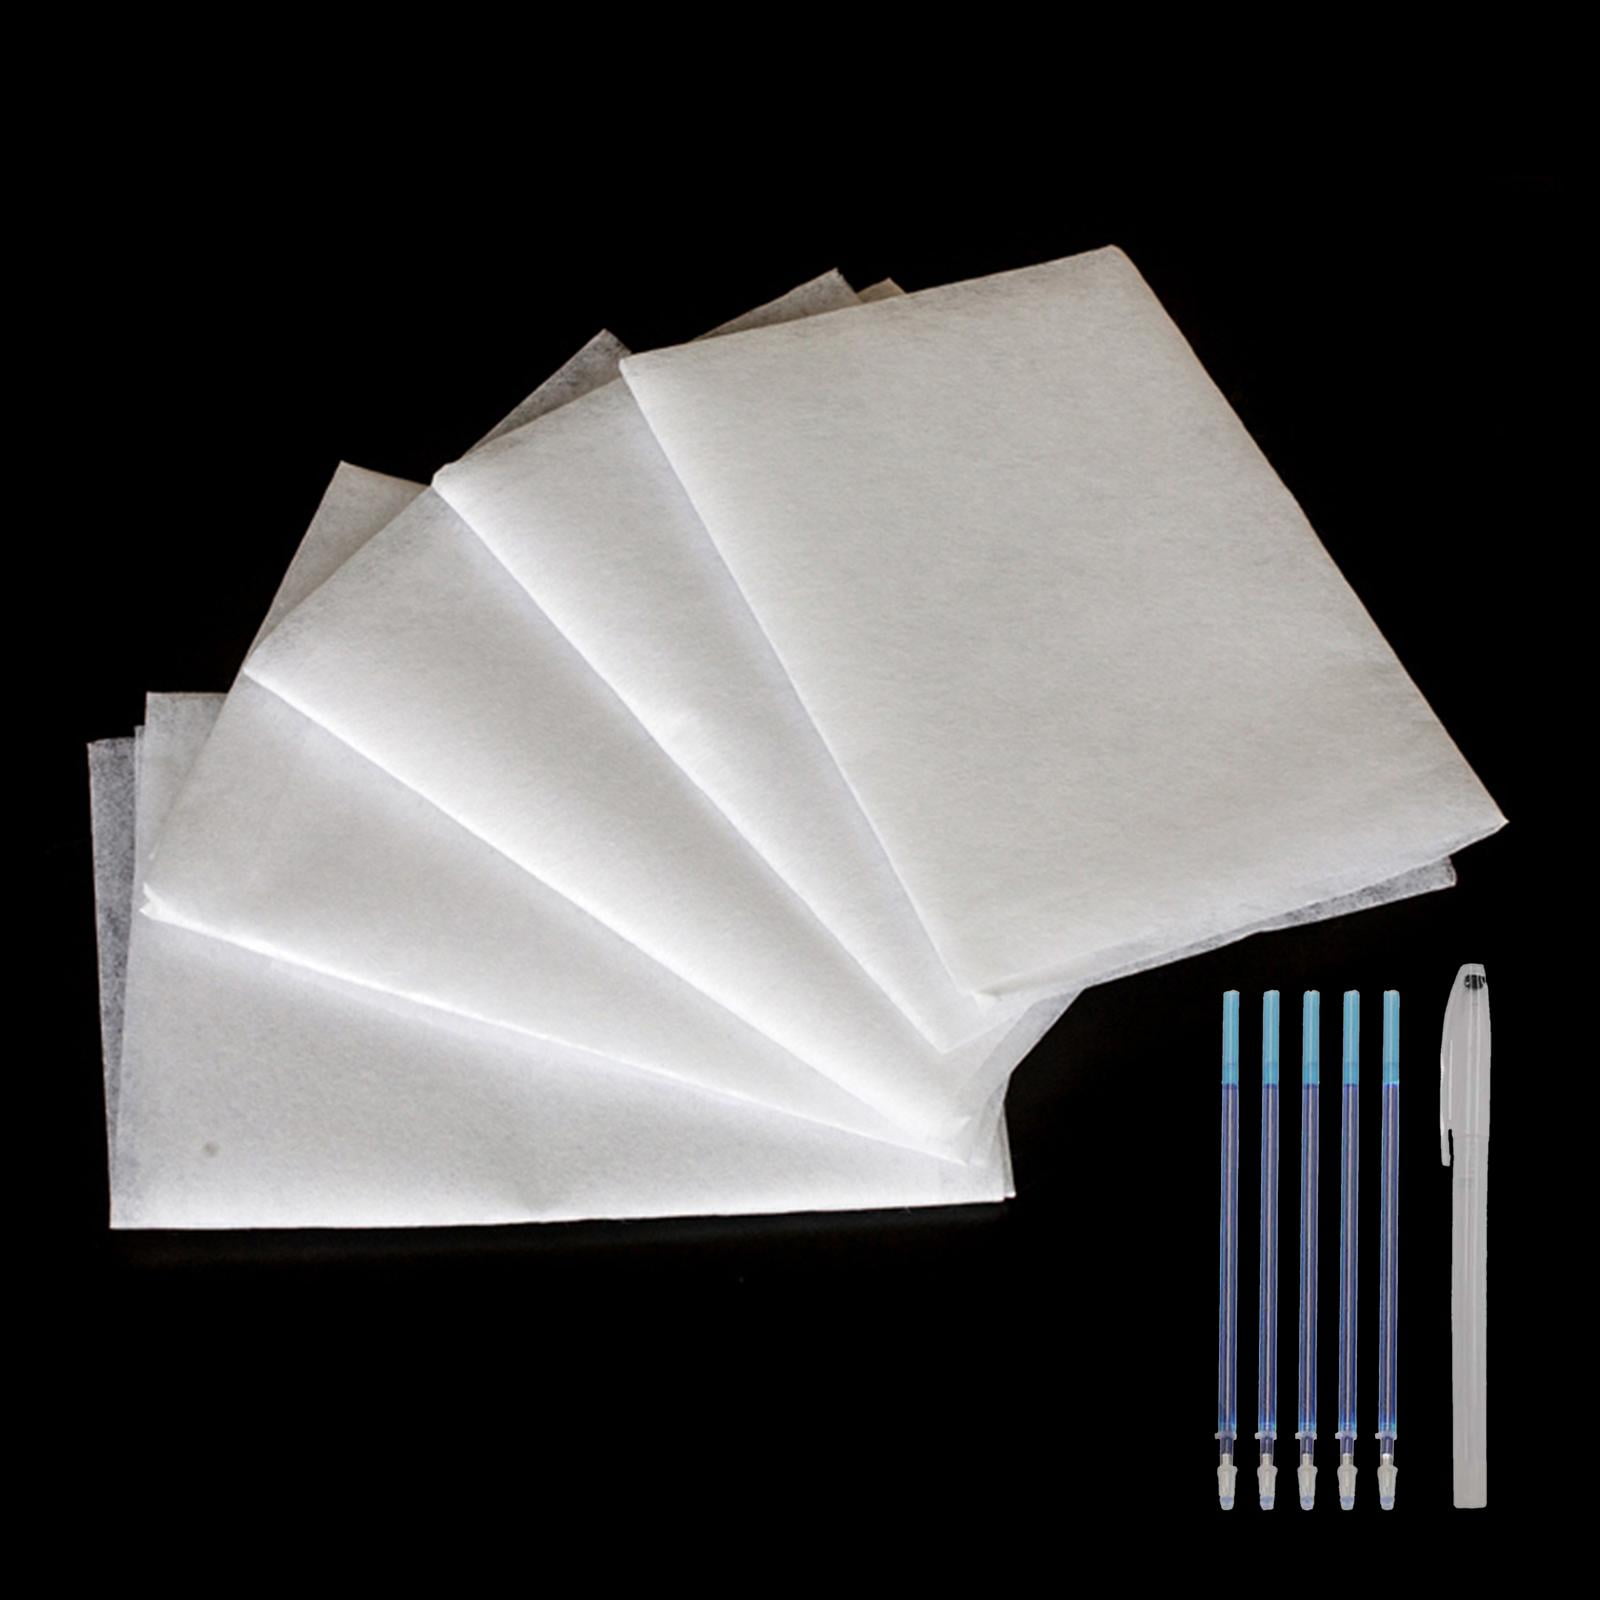 10 Pcs Transfer Paper Repeatedly Use Carbon Water-Soluble Tracing Paper  8×6,Transfer Pattern on Cloth,Fabric,Canvas,Paper for Home Sewing  Cross-Stitch Paint 